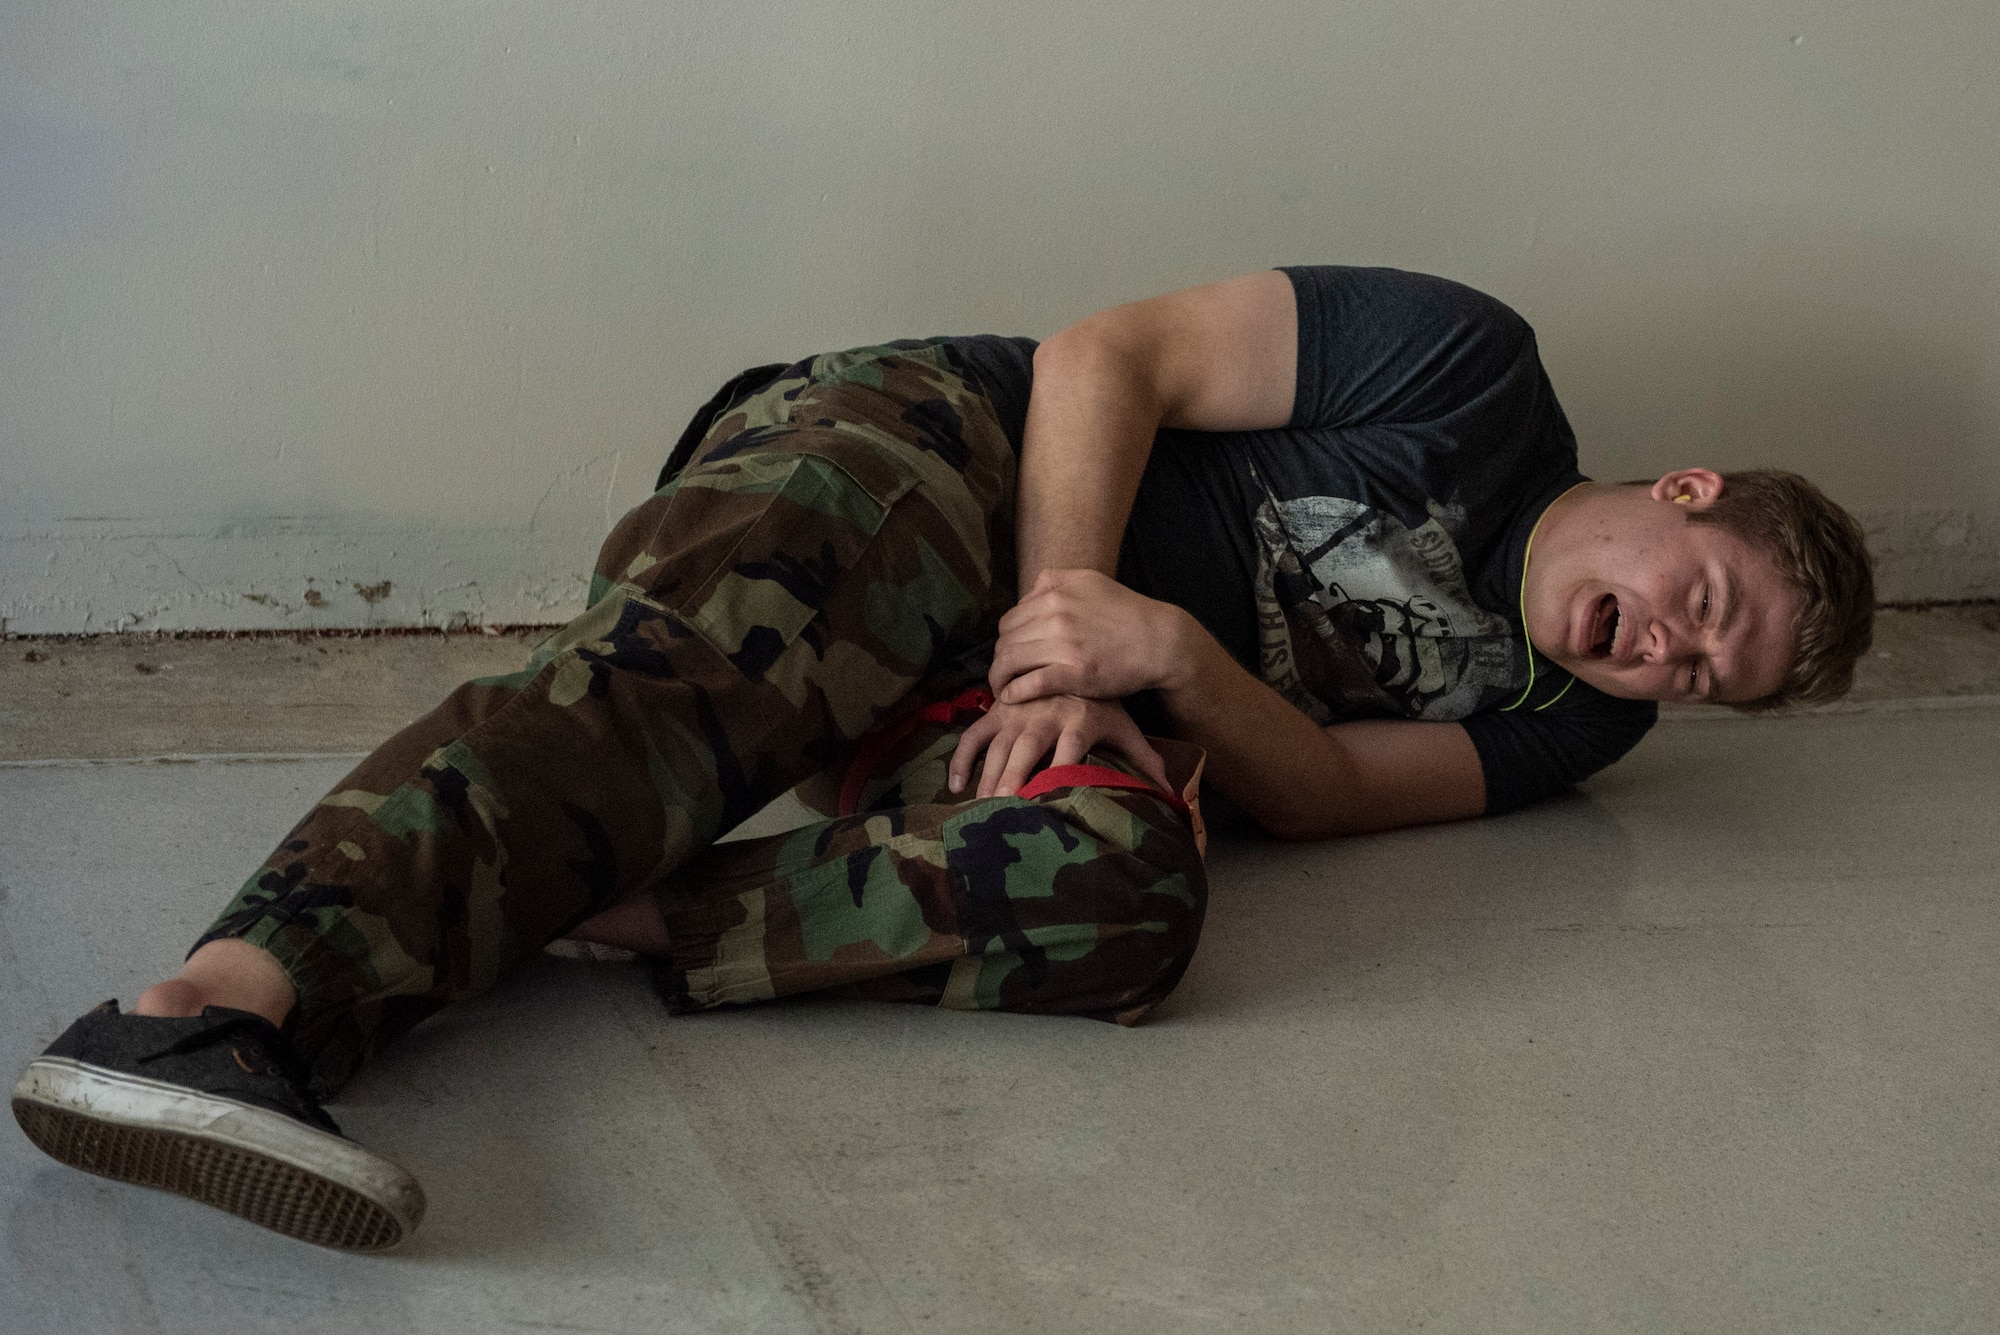 A role-player screams in “pain” after a simulated gunshot wound while waiting for first responders during an active-shooter exercise, Aug. 18 at Wright-Patterson Air Force Base. Readiness exercises are routinely held to streamline unit cohesion when responding to emergencies. (U.S. Air Force photo by Wesley Farnsworth)